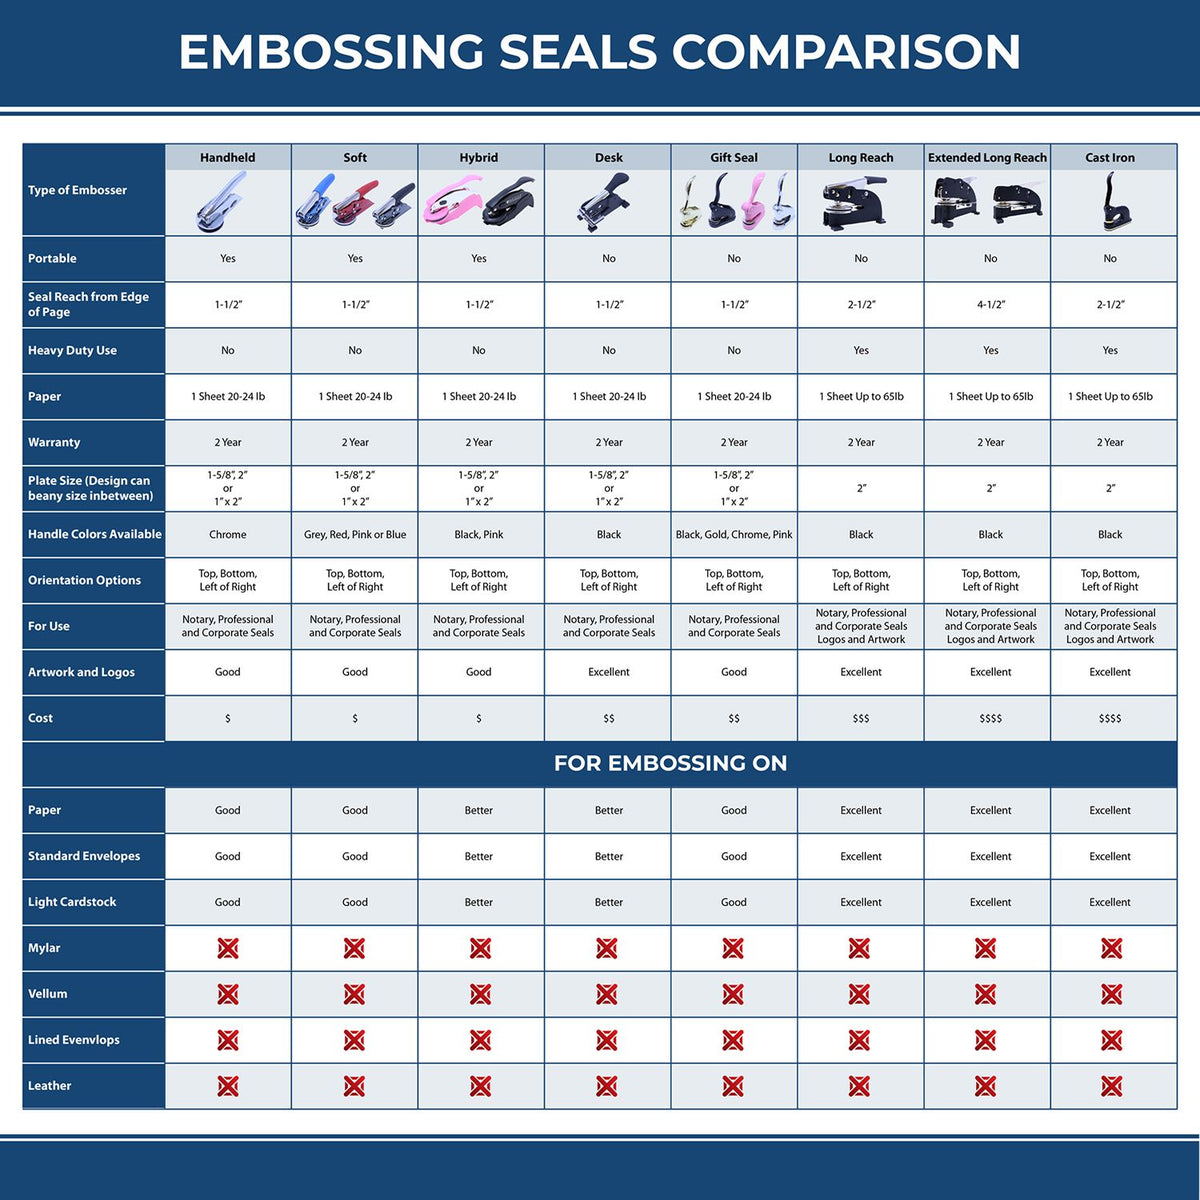 A comparison chart for the different types of mount models available for the Heavy Duty Cast Iron Guam Architect Embosser.